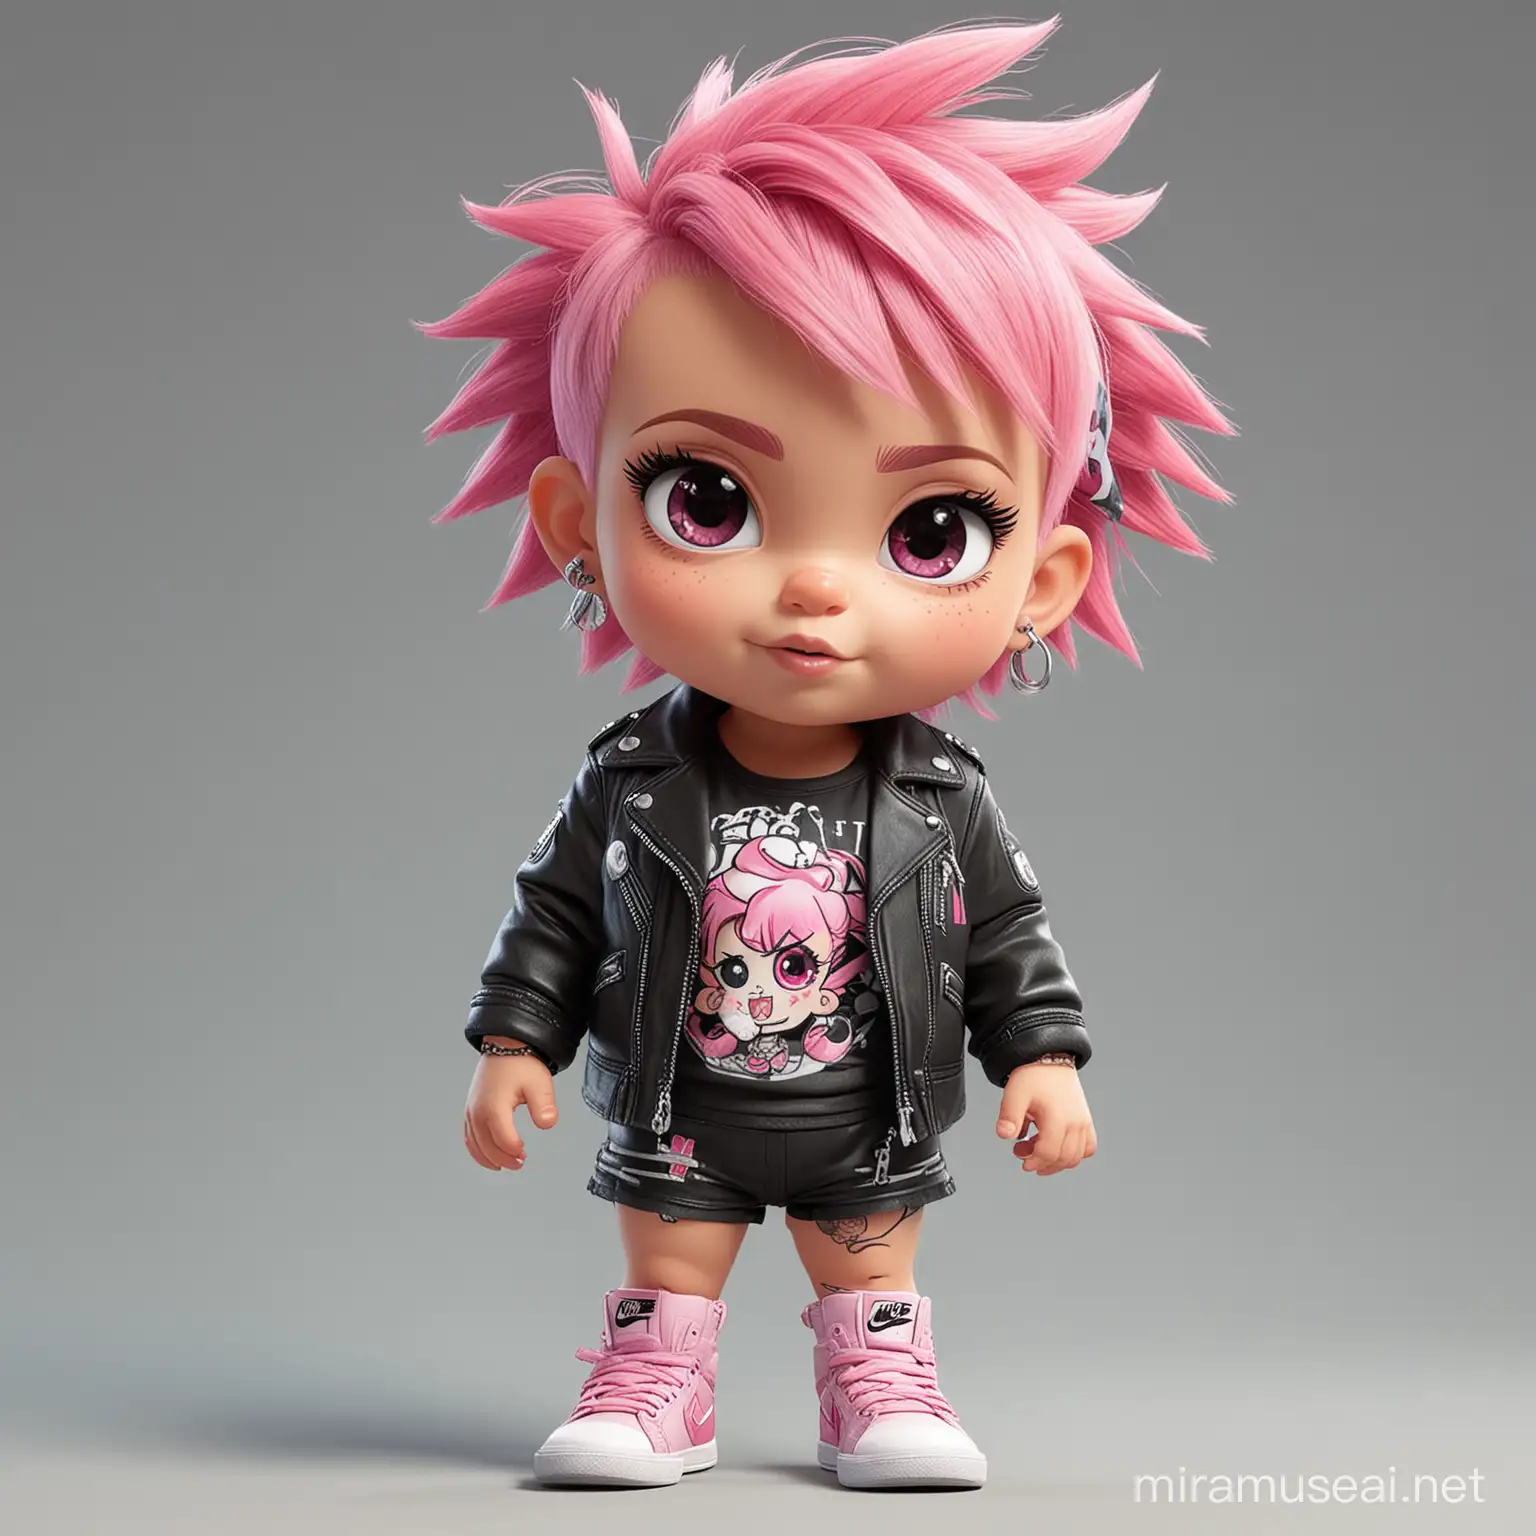 Adorable Cartoon Baby Punk with Pink Crest Hair and Piercings in Leather Jacket and Diaper